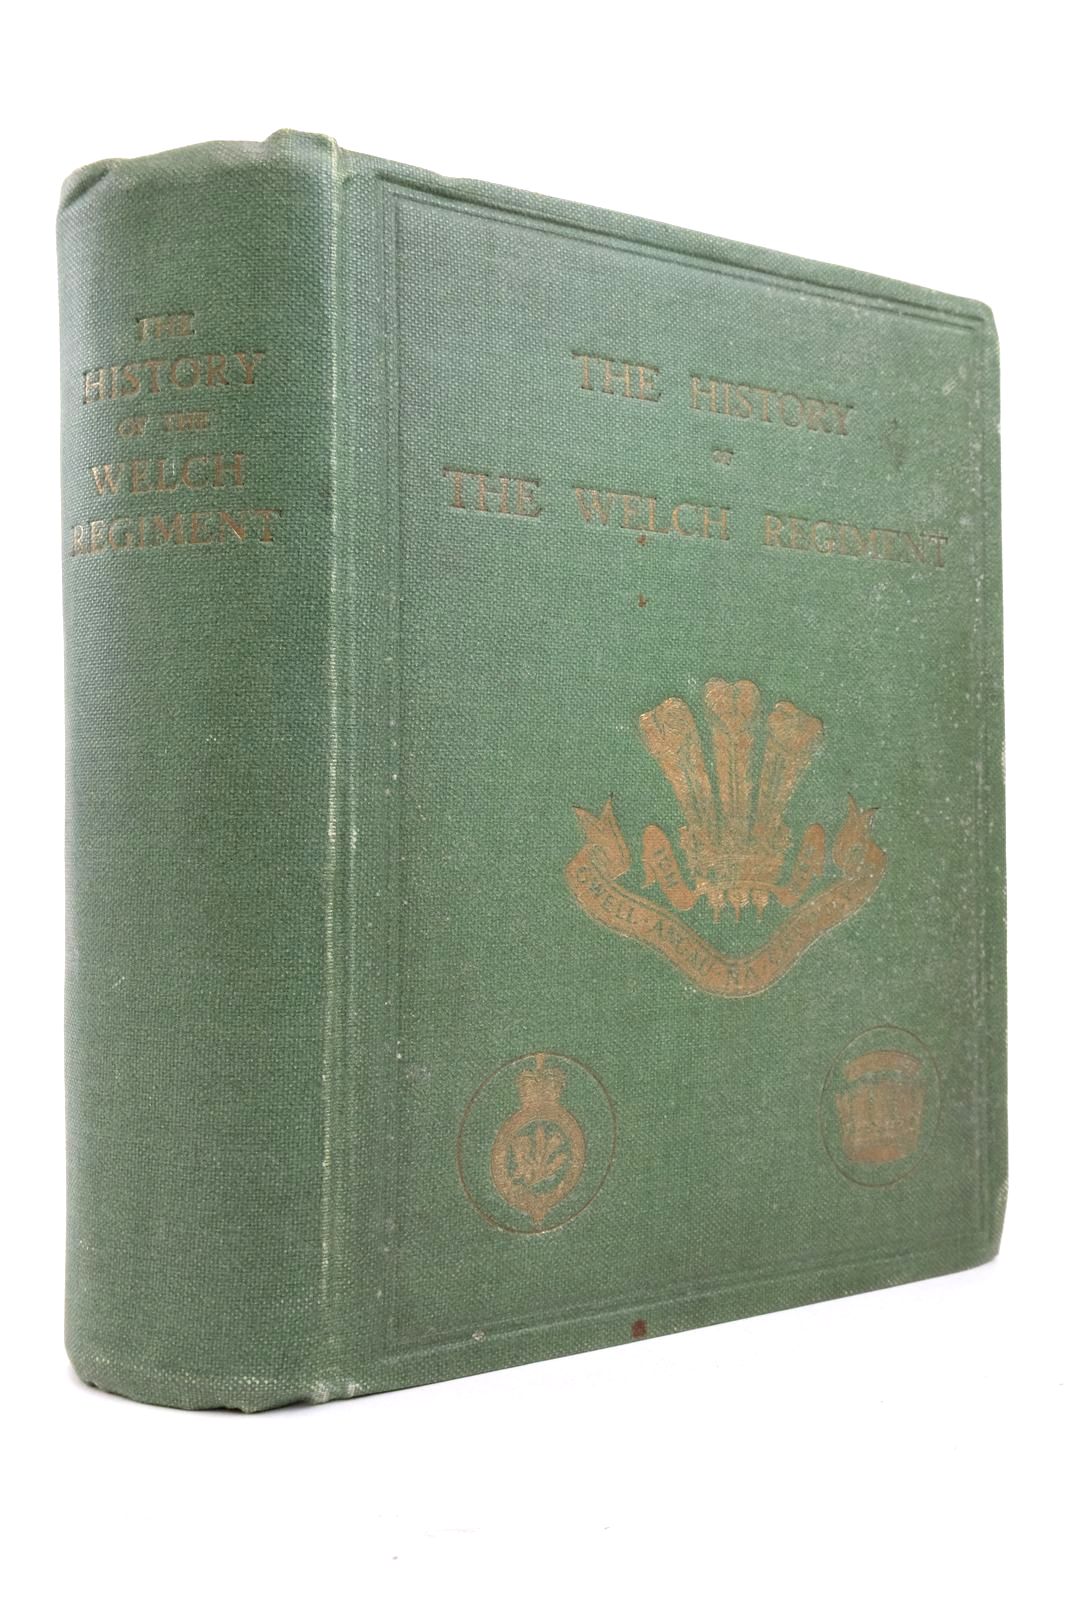 Photo of THE HISTORY OF THE WELCH REGIMENT- Stock Number: 2137738